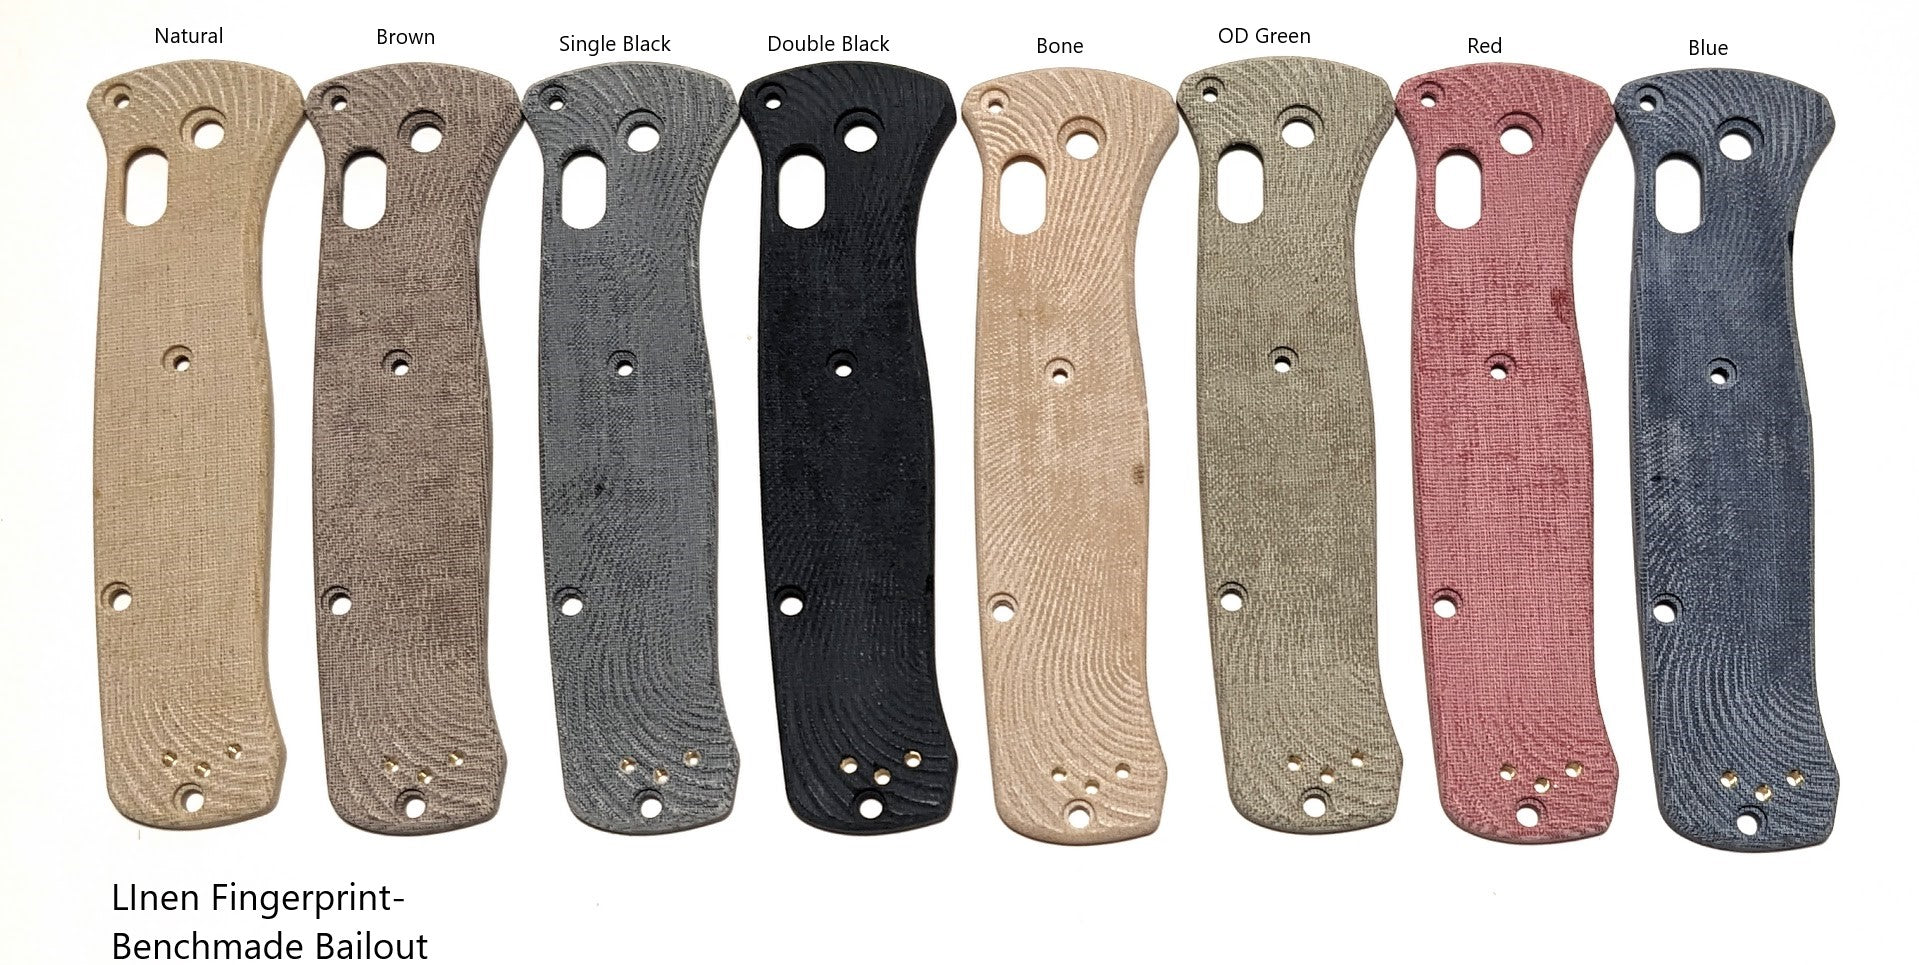 Fingerprint Micarta scale sets for the Benchmade Bailout by Ripp's Garage Tech